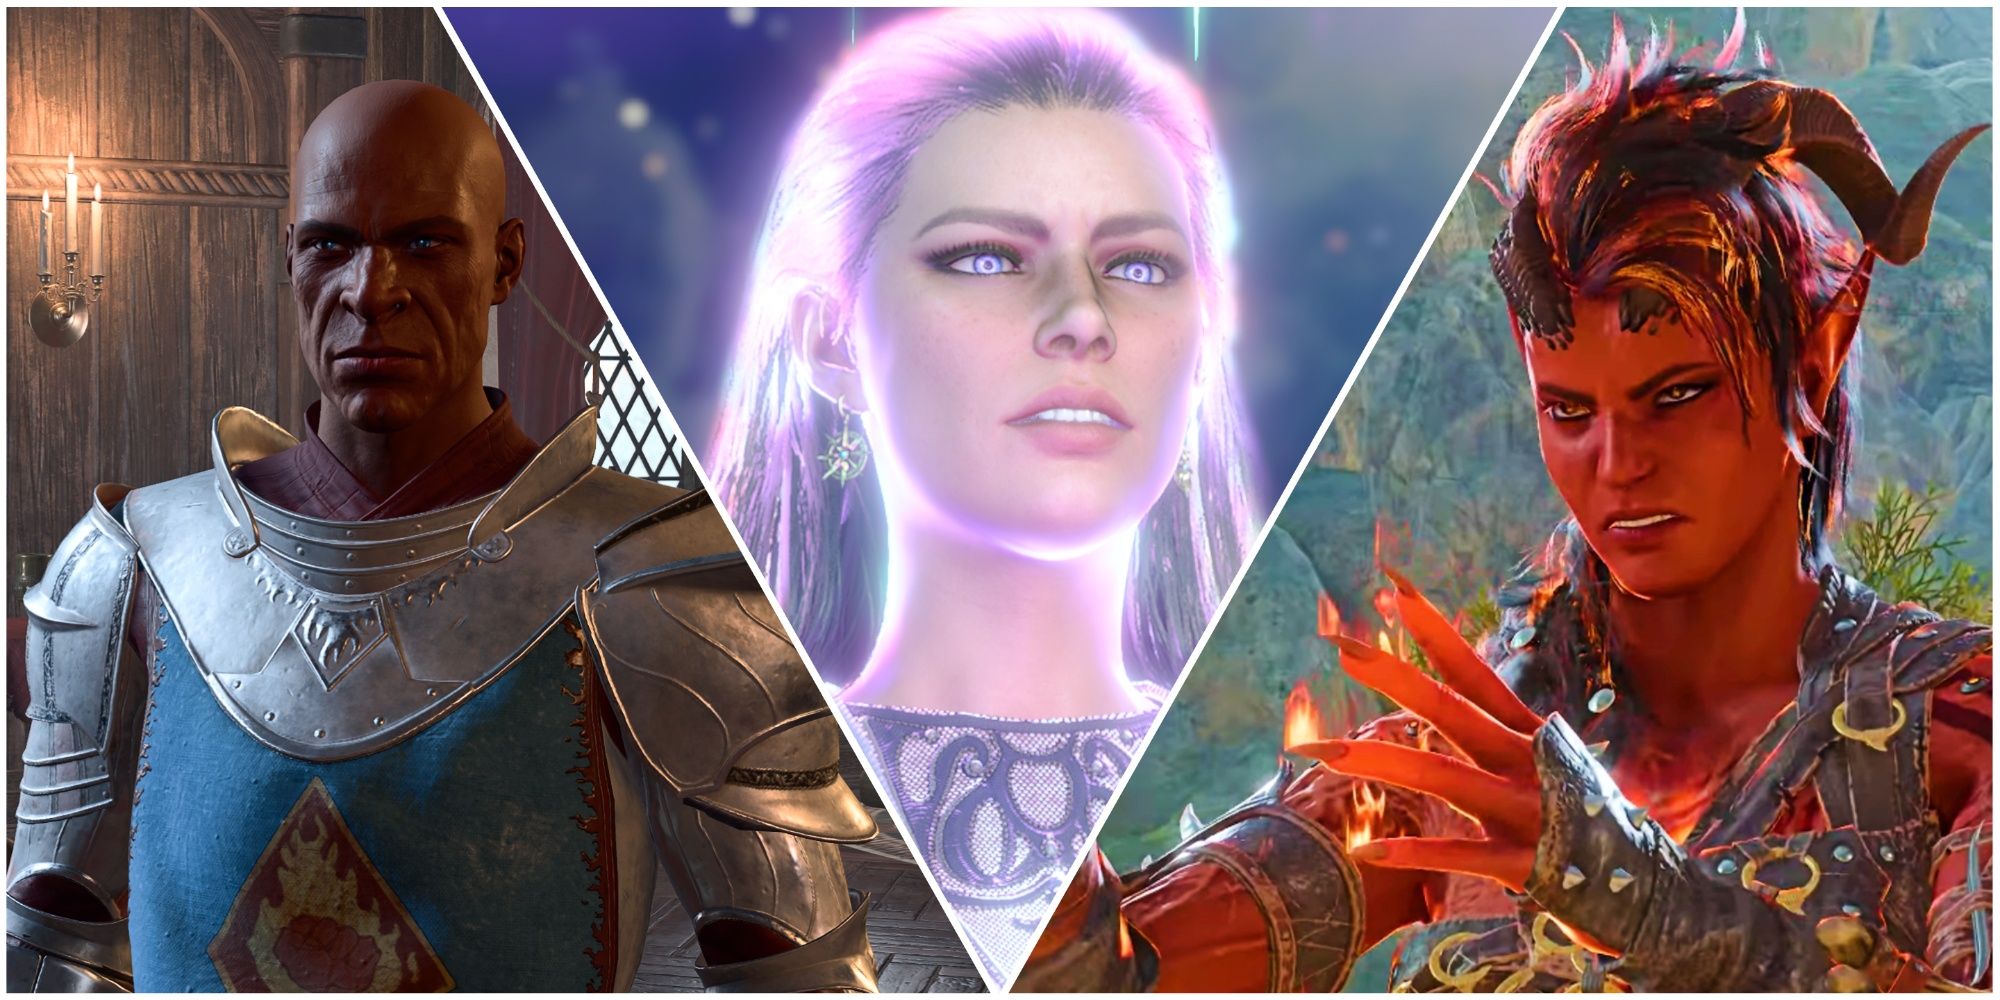 A split image featuring three characters from Baldur's Gate 3: Ulder Ravenguard on the left, Mystra in the middle, and Karlach on the right.